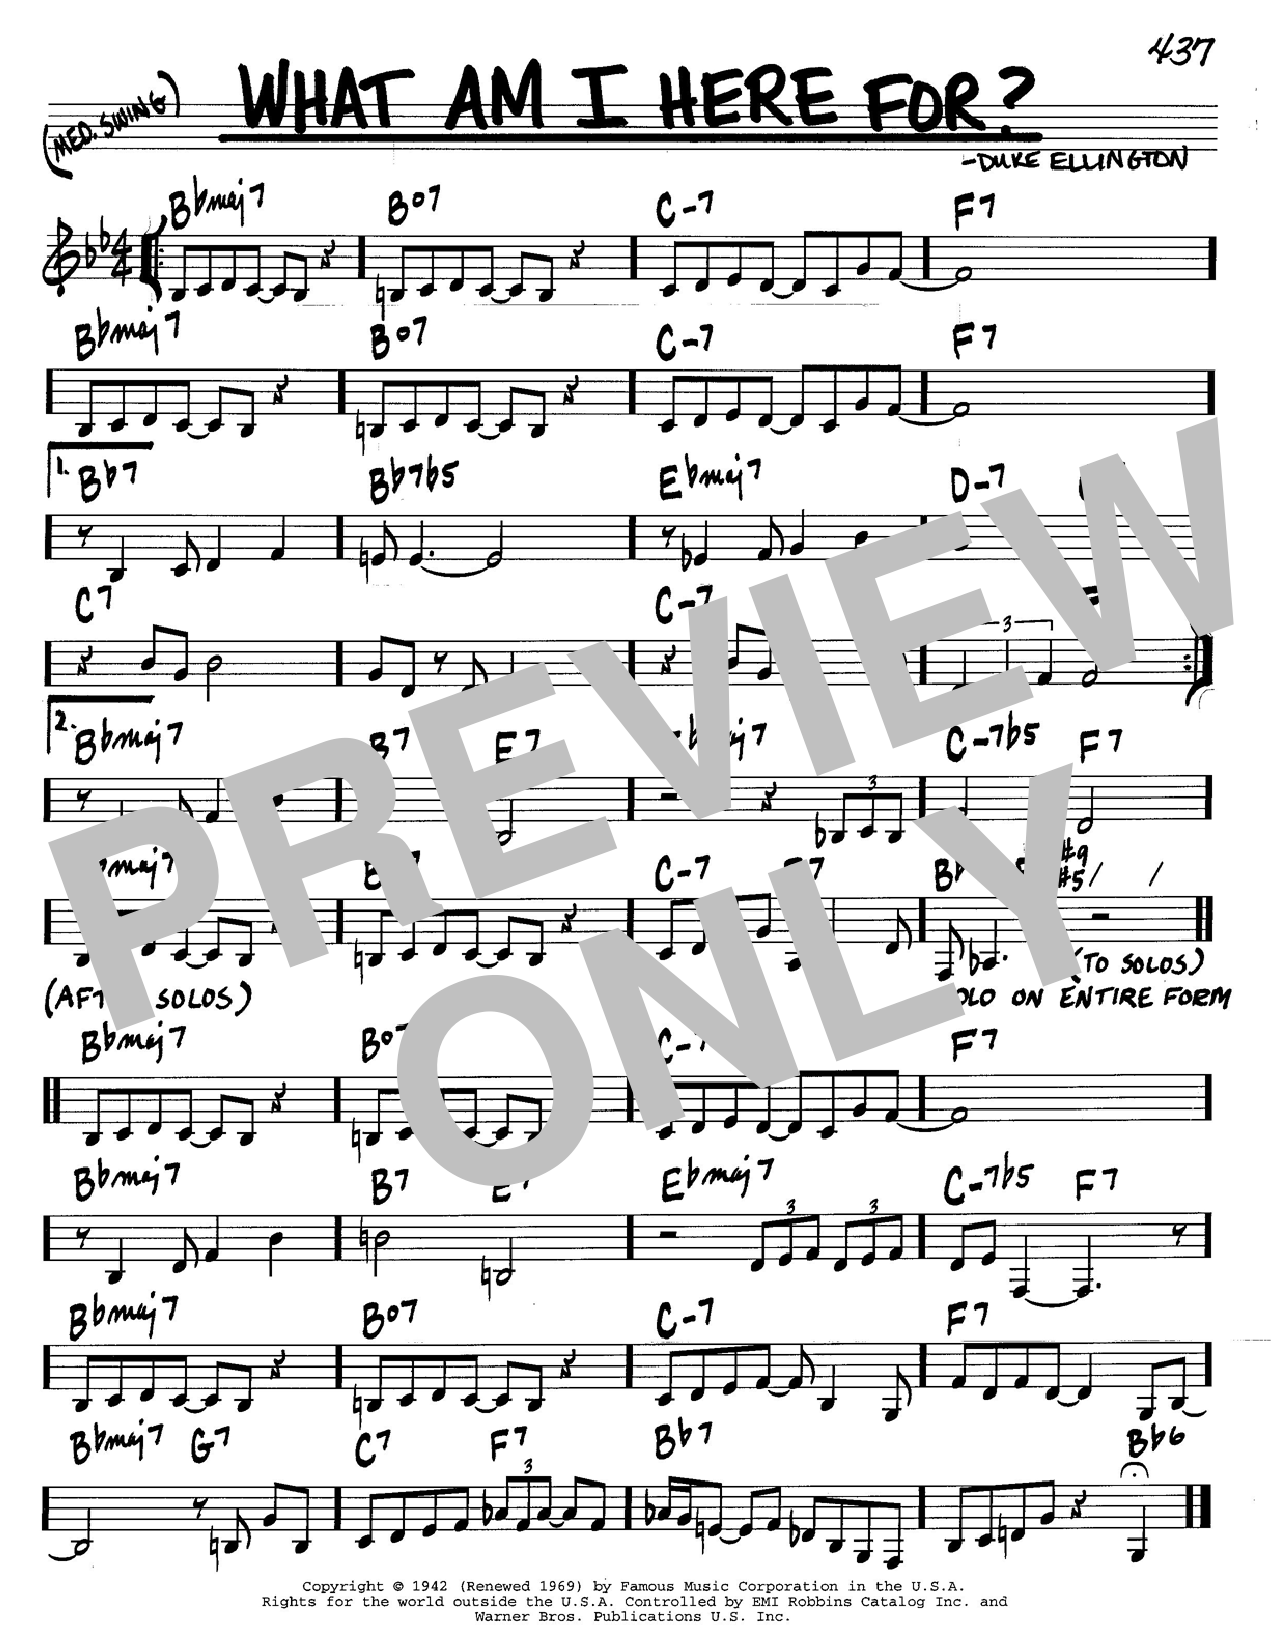 What Am I Here For? sheet music